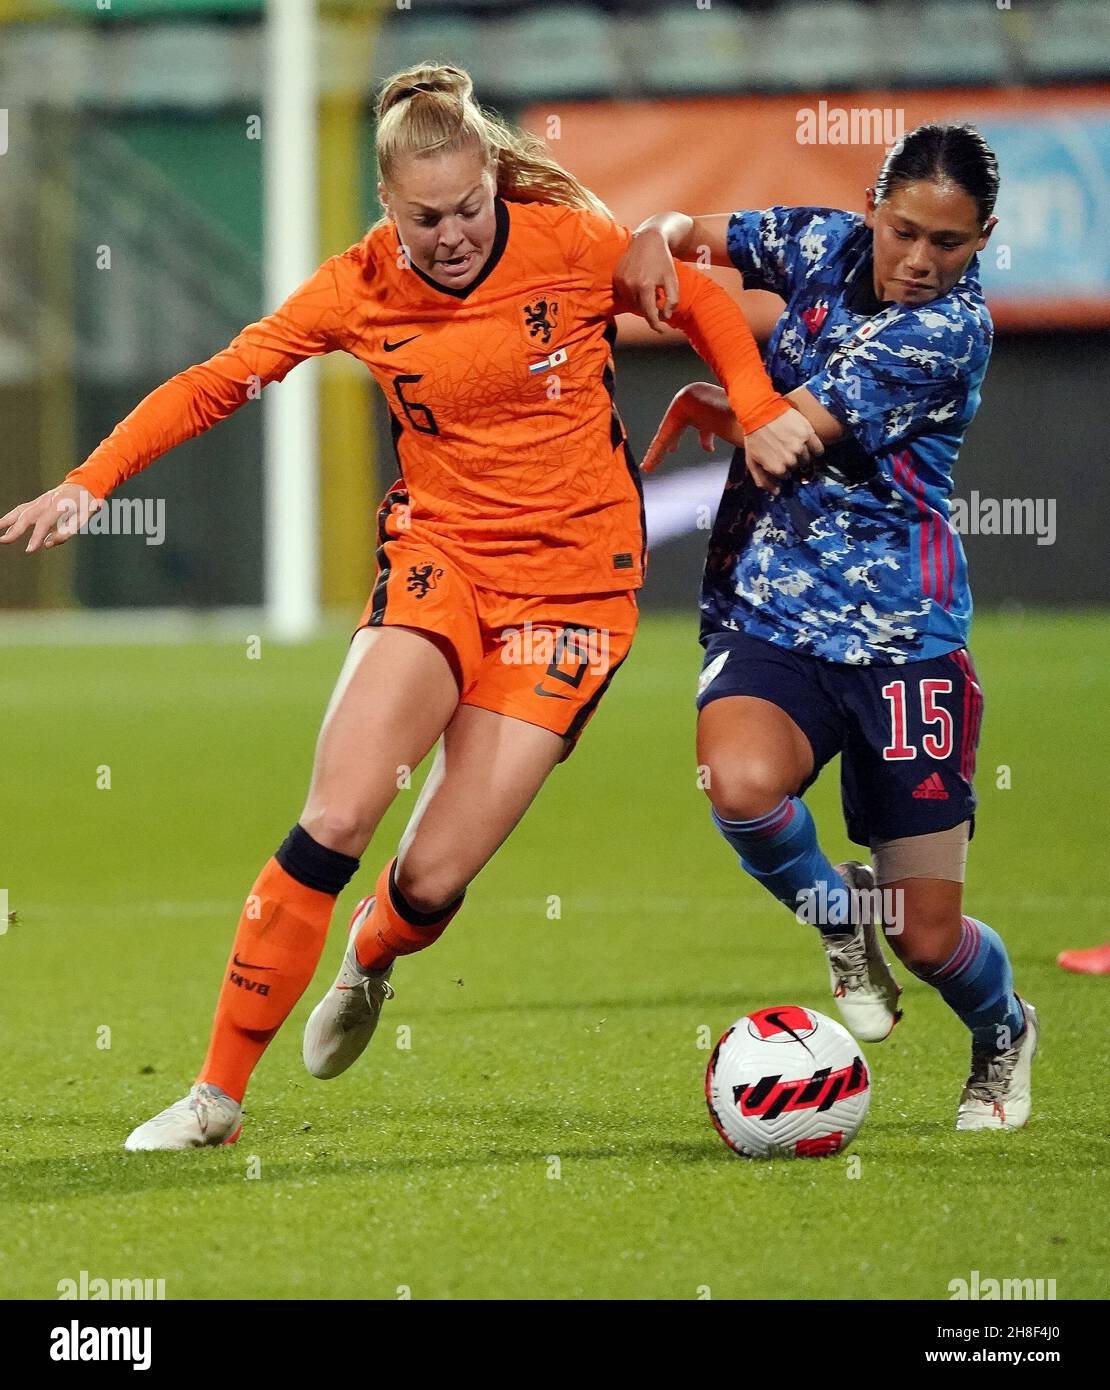 Jill Baijings of the Netherlands and Fuka Nagano of Japan during International Friendly Match The Netherlands vs Japan on November 29, 2021 at the Car Jeans Stadium in The Hague, Netherlands Photo by SCS/Soenar Chamid/AFLO (HOLLAND OUT) Stock Photo